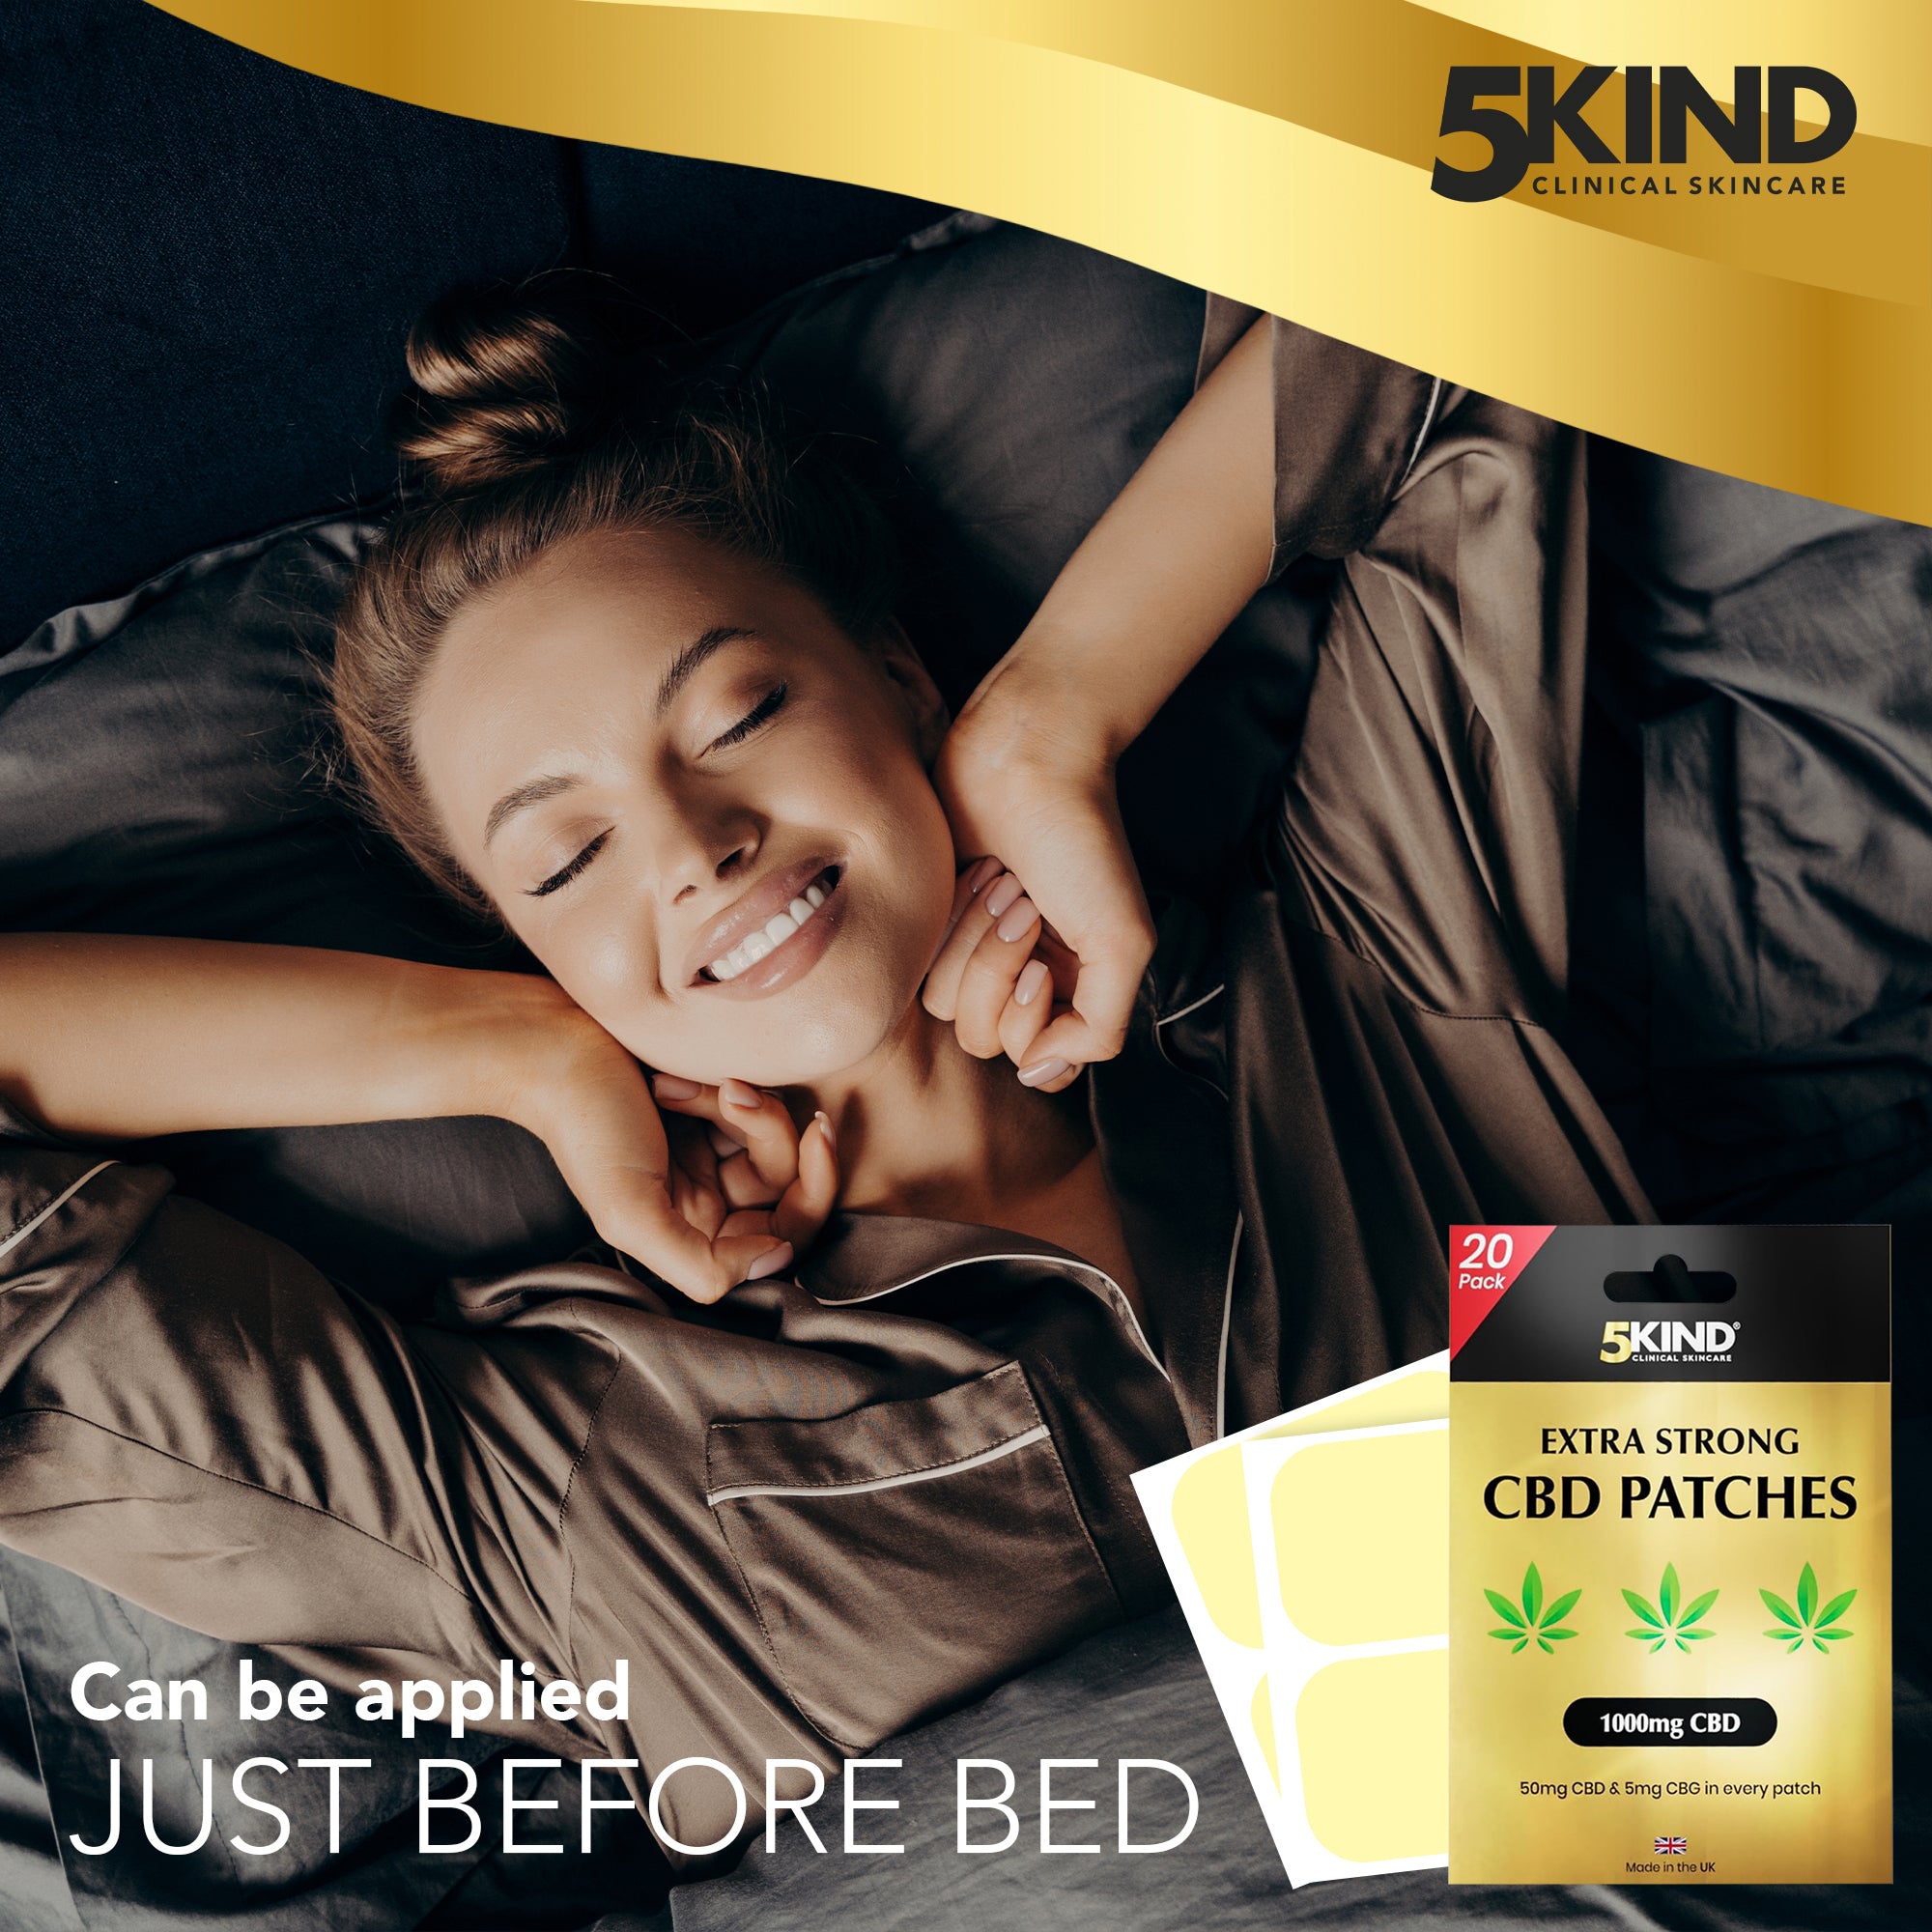 CBD Patches latest launch by 5Kind